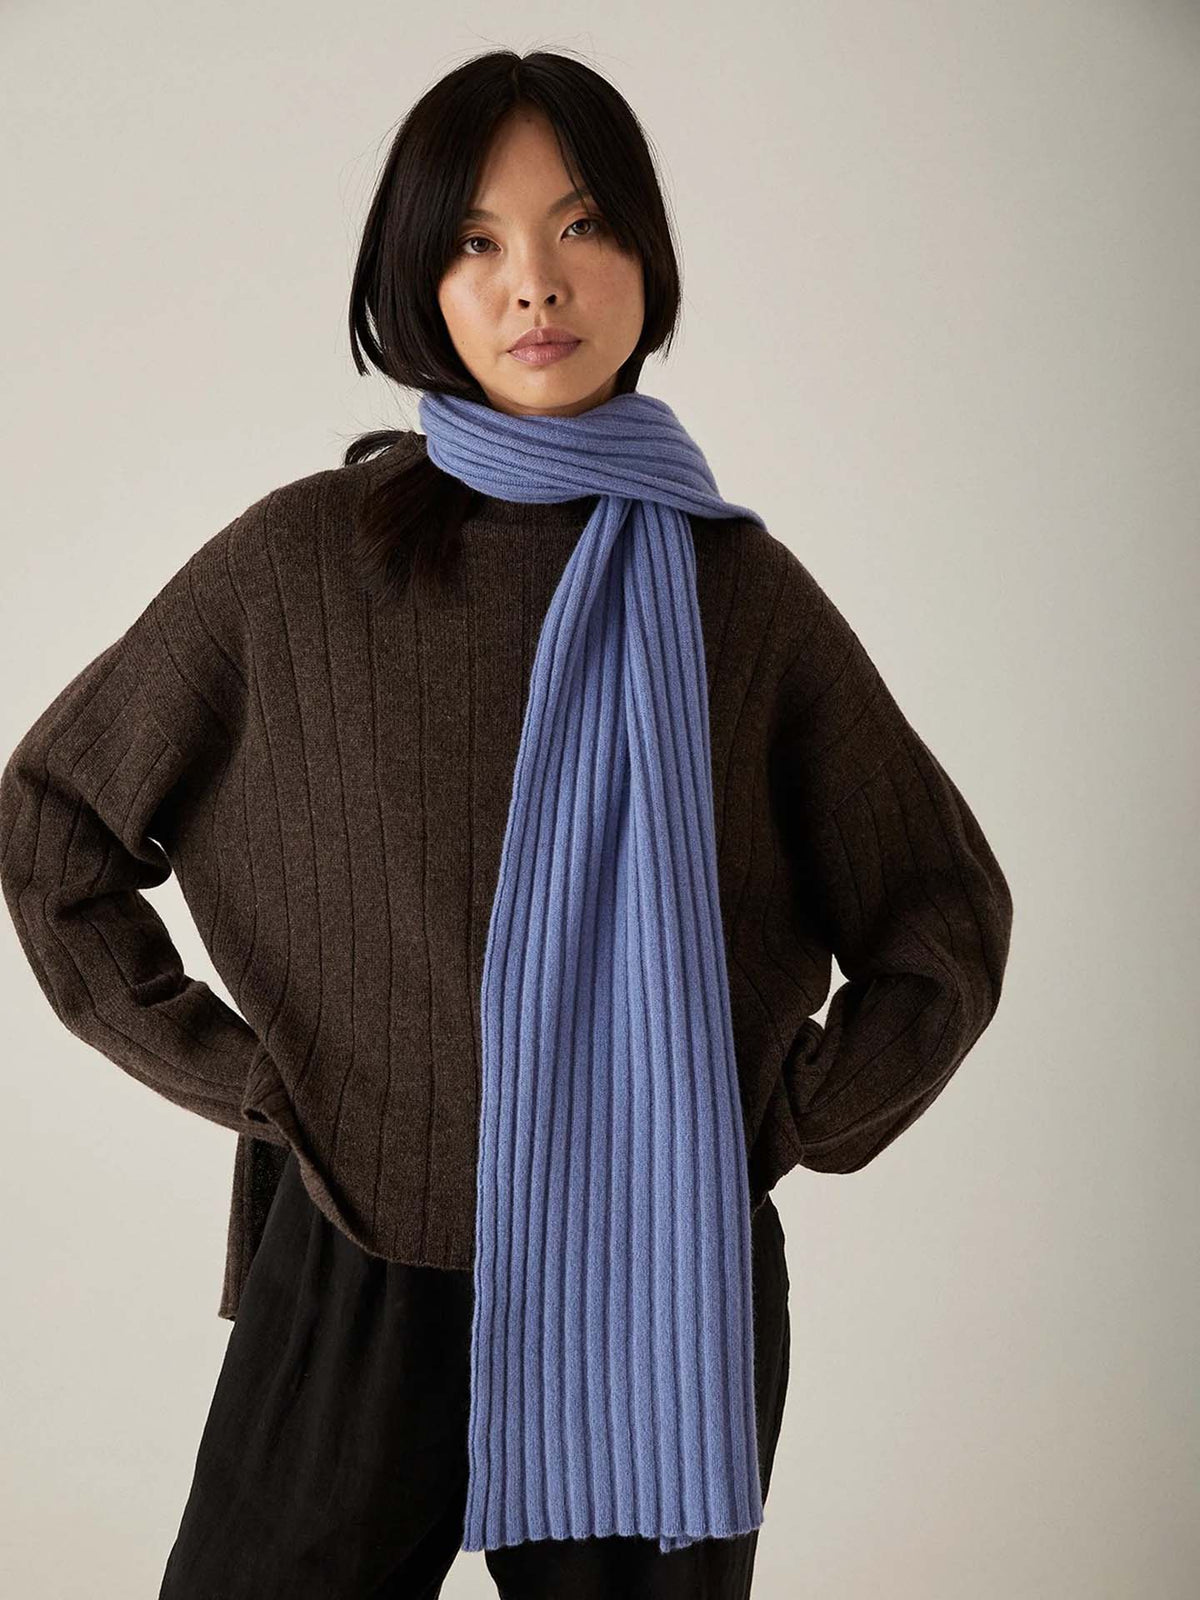 The model is wearing a blue ribbed scarf crafted from Italian air-spun merino by Francie&#39;s Echo Knit – Truffle.